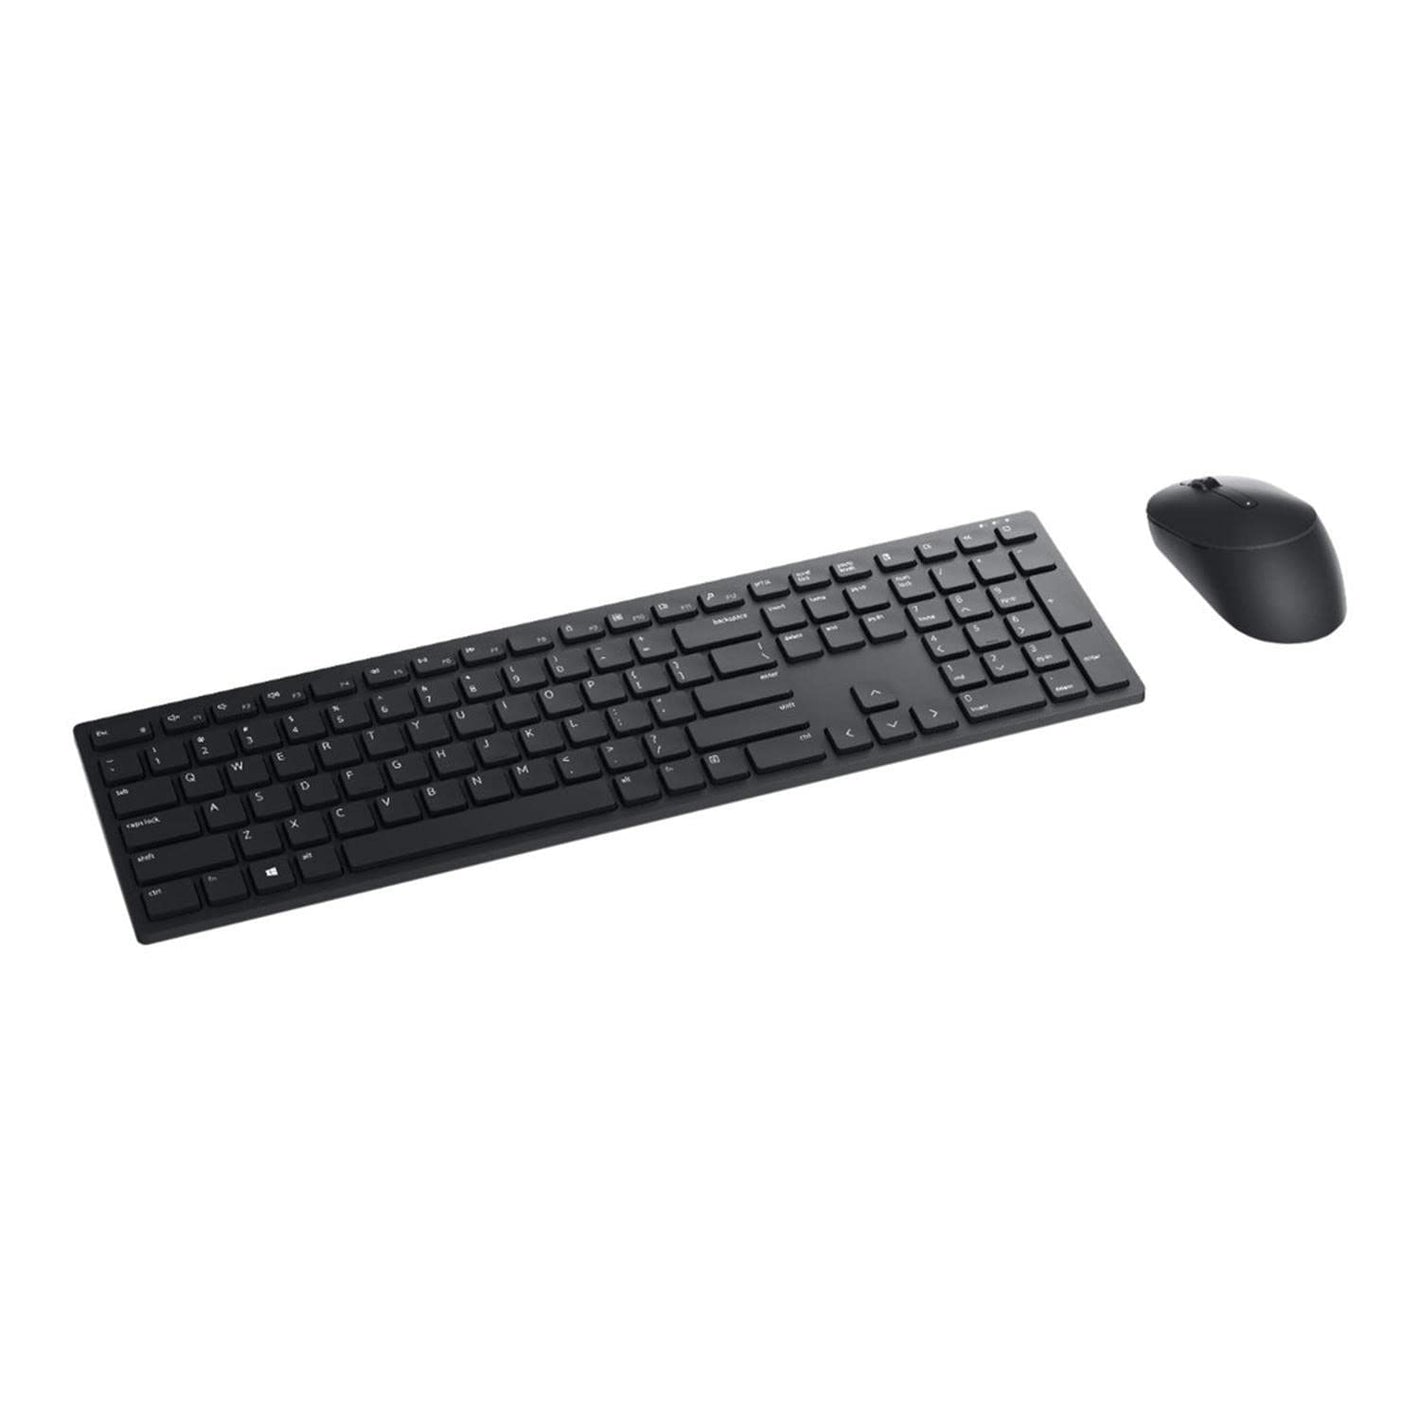 Dell KM5221W Pro Wireless Keyboard and Mouse, UK (QWERTY), 2.4GHz, 128-bit AES Encryption, 4000 dpi, Windows, Apple, Android, Linux and Chrome, (Black)